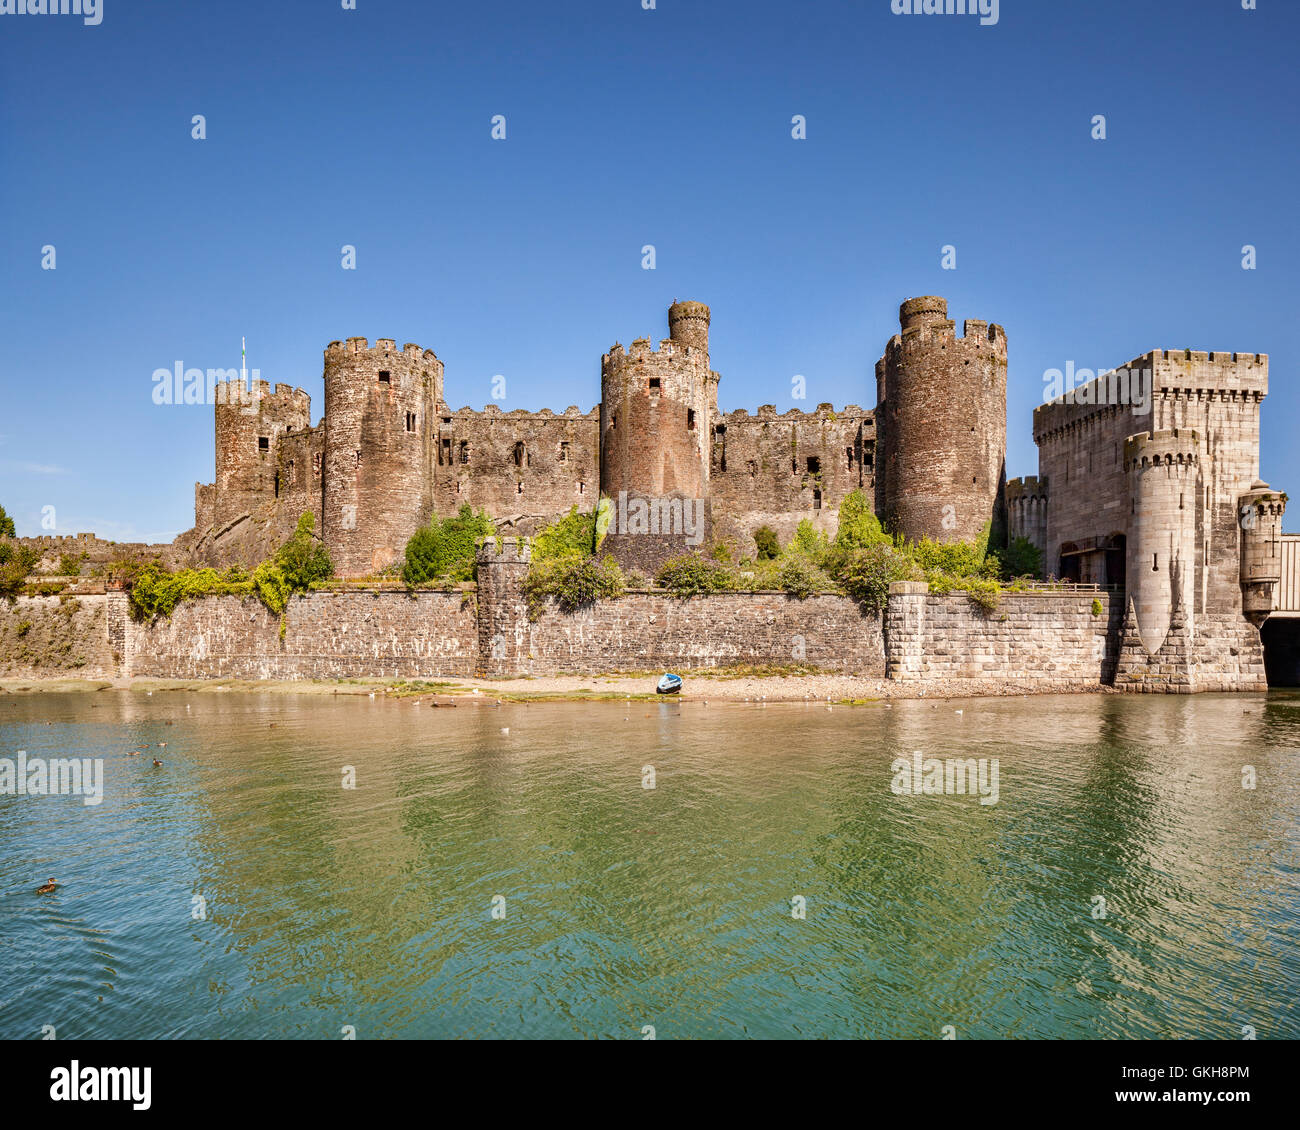 Conwy Castle from the south, across the River Gyffi, in Conwy, Wales, United Kingdom. Stock Photo